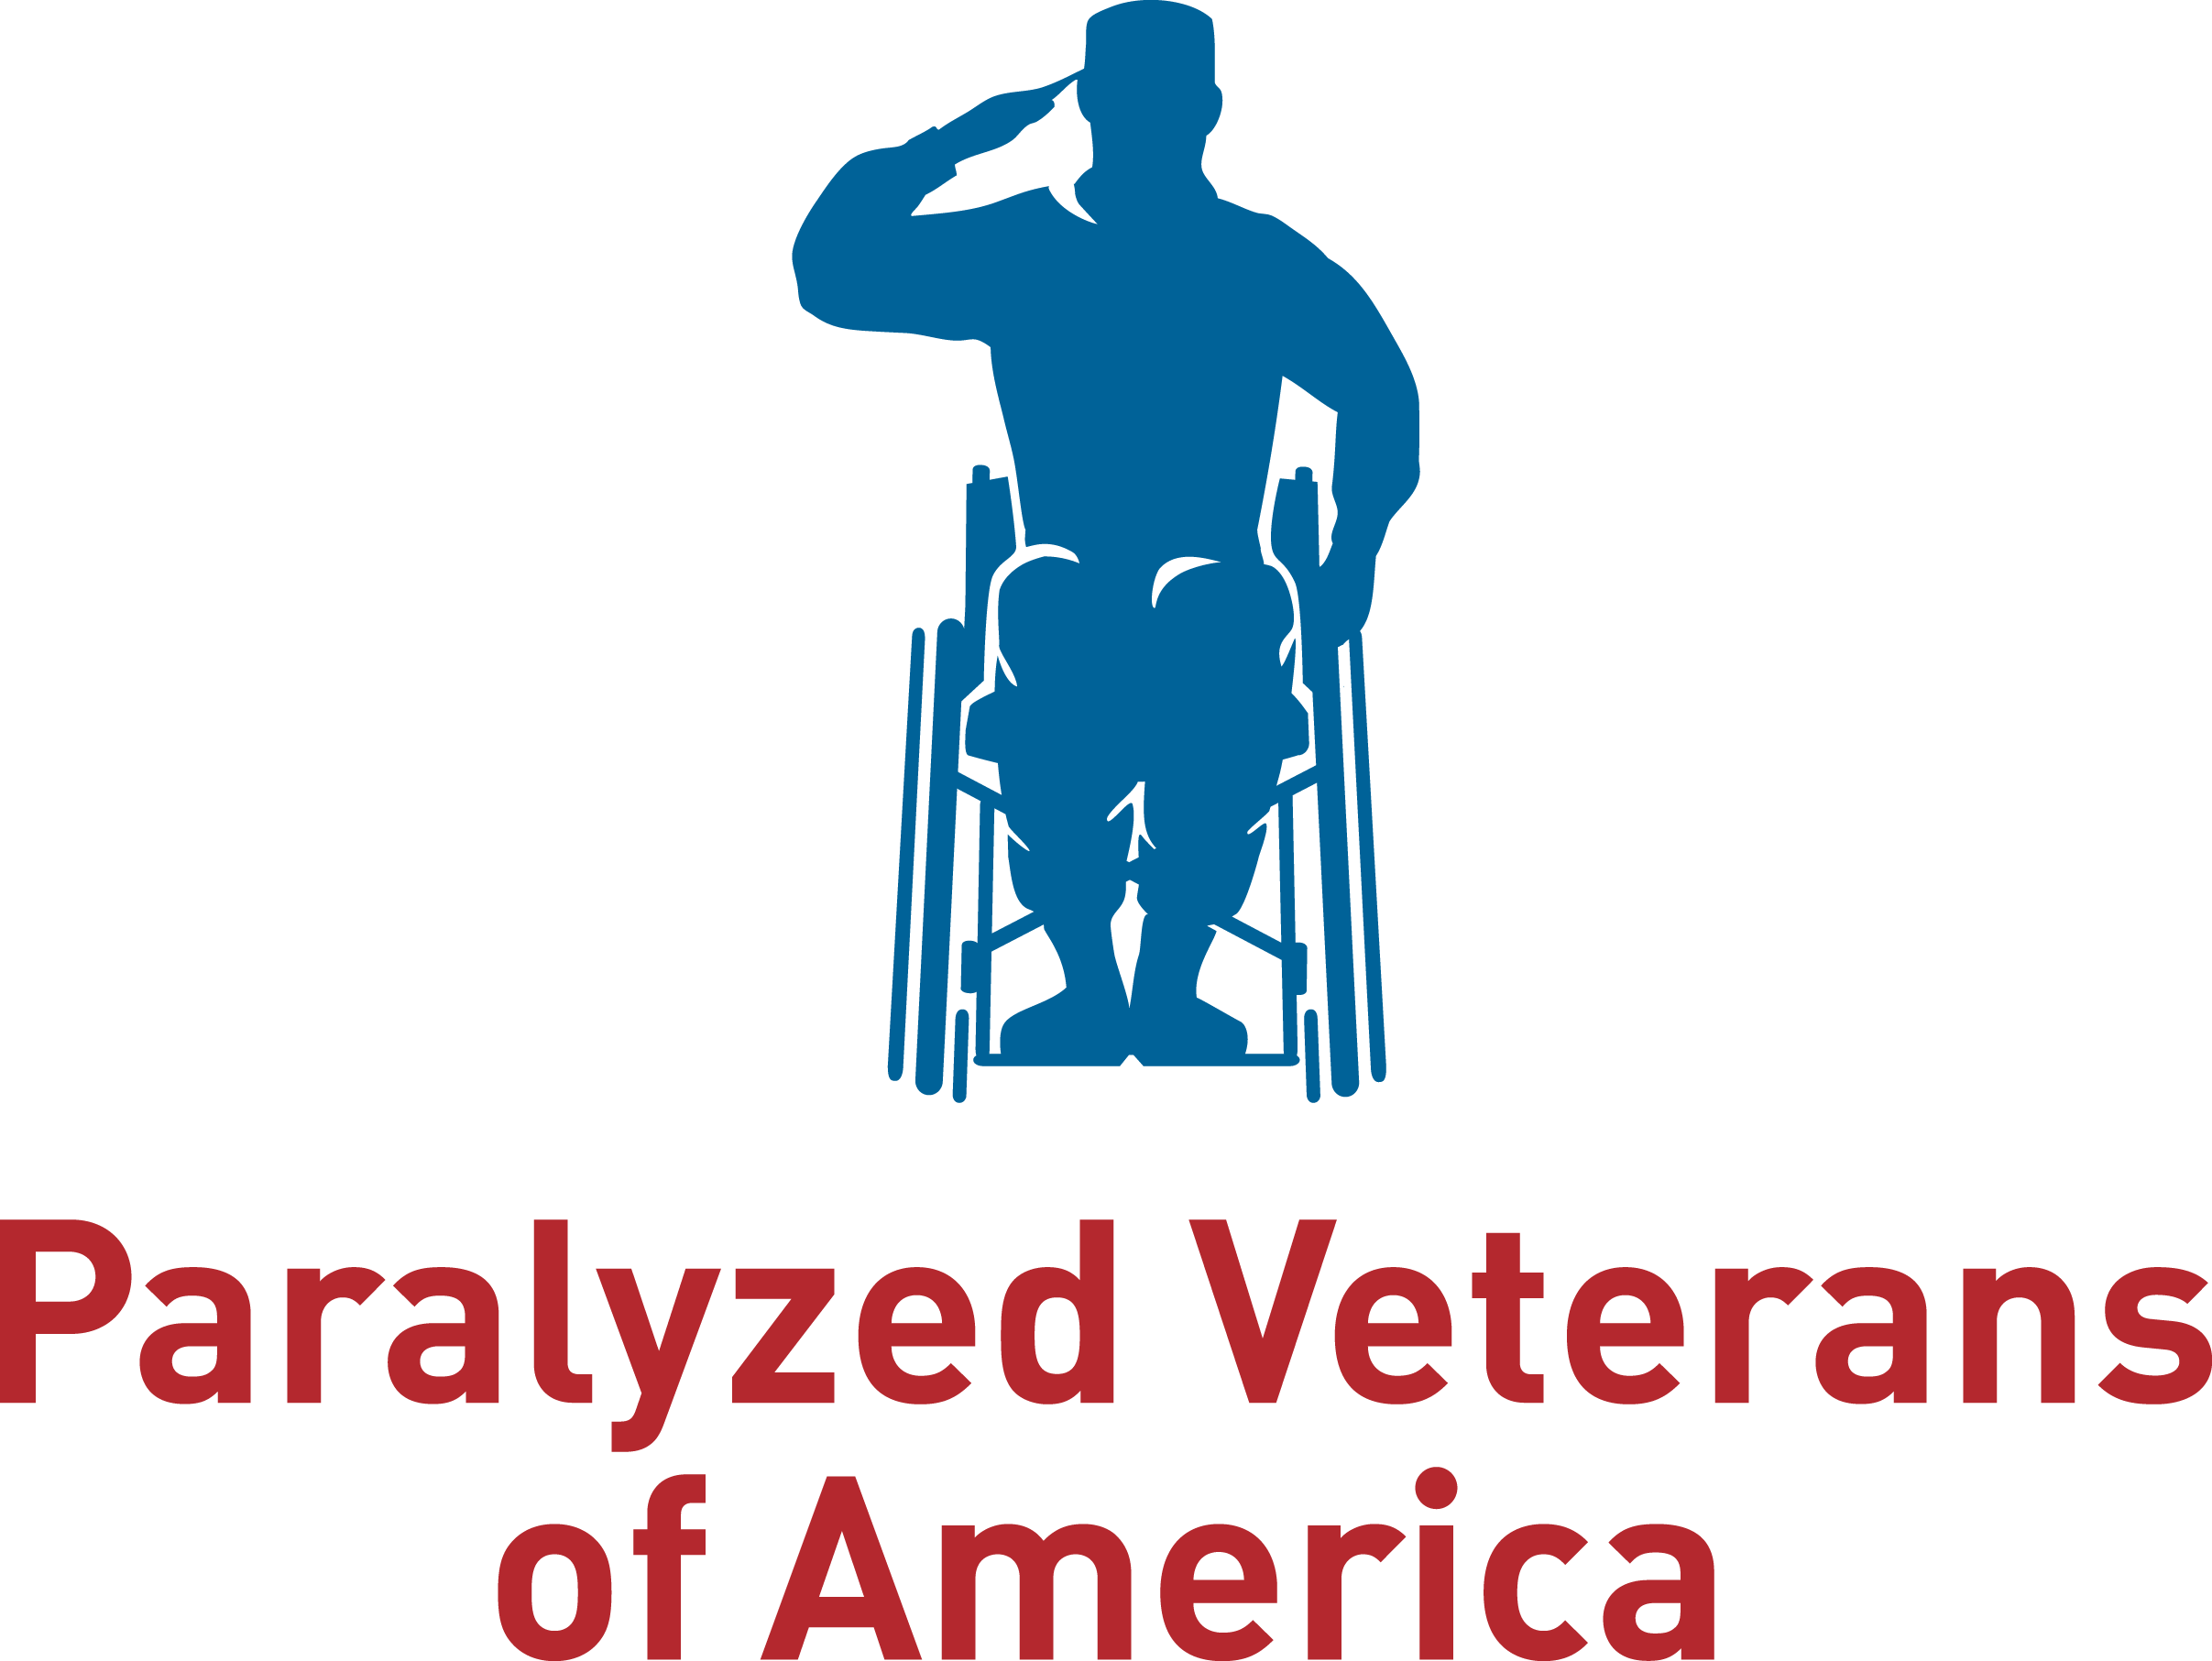 A portion of each vehicle purchased will be donated to the Paralyzed Veterans of America.